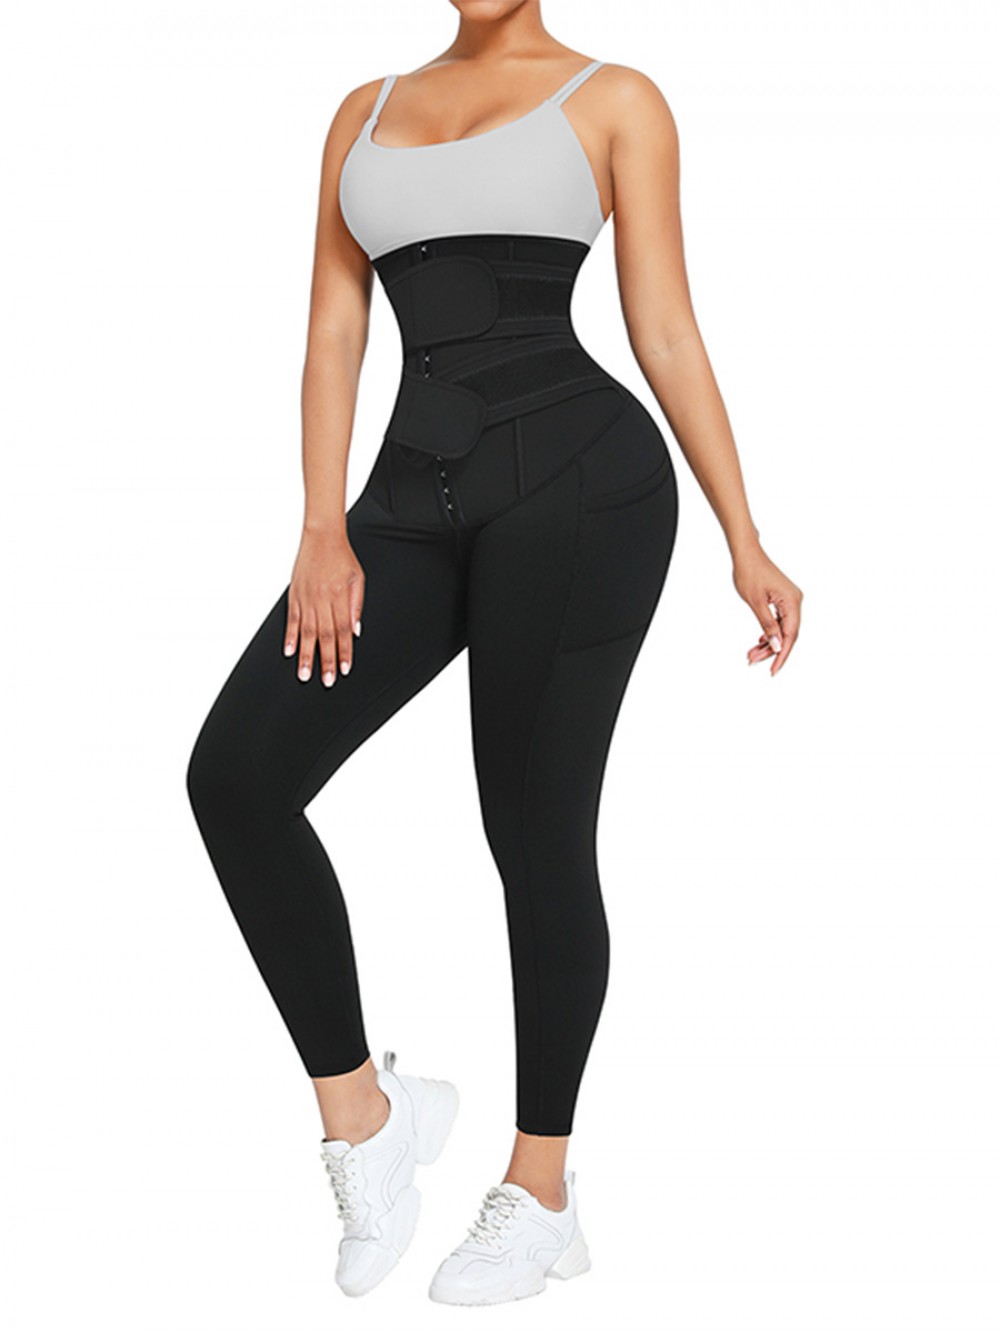 Black Blue PU Coated Lining Leggings And Double Waistbands Tummy Control